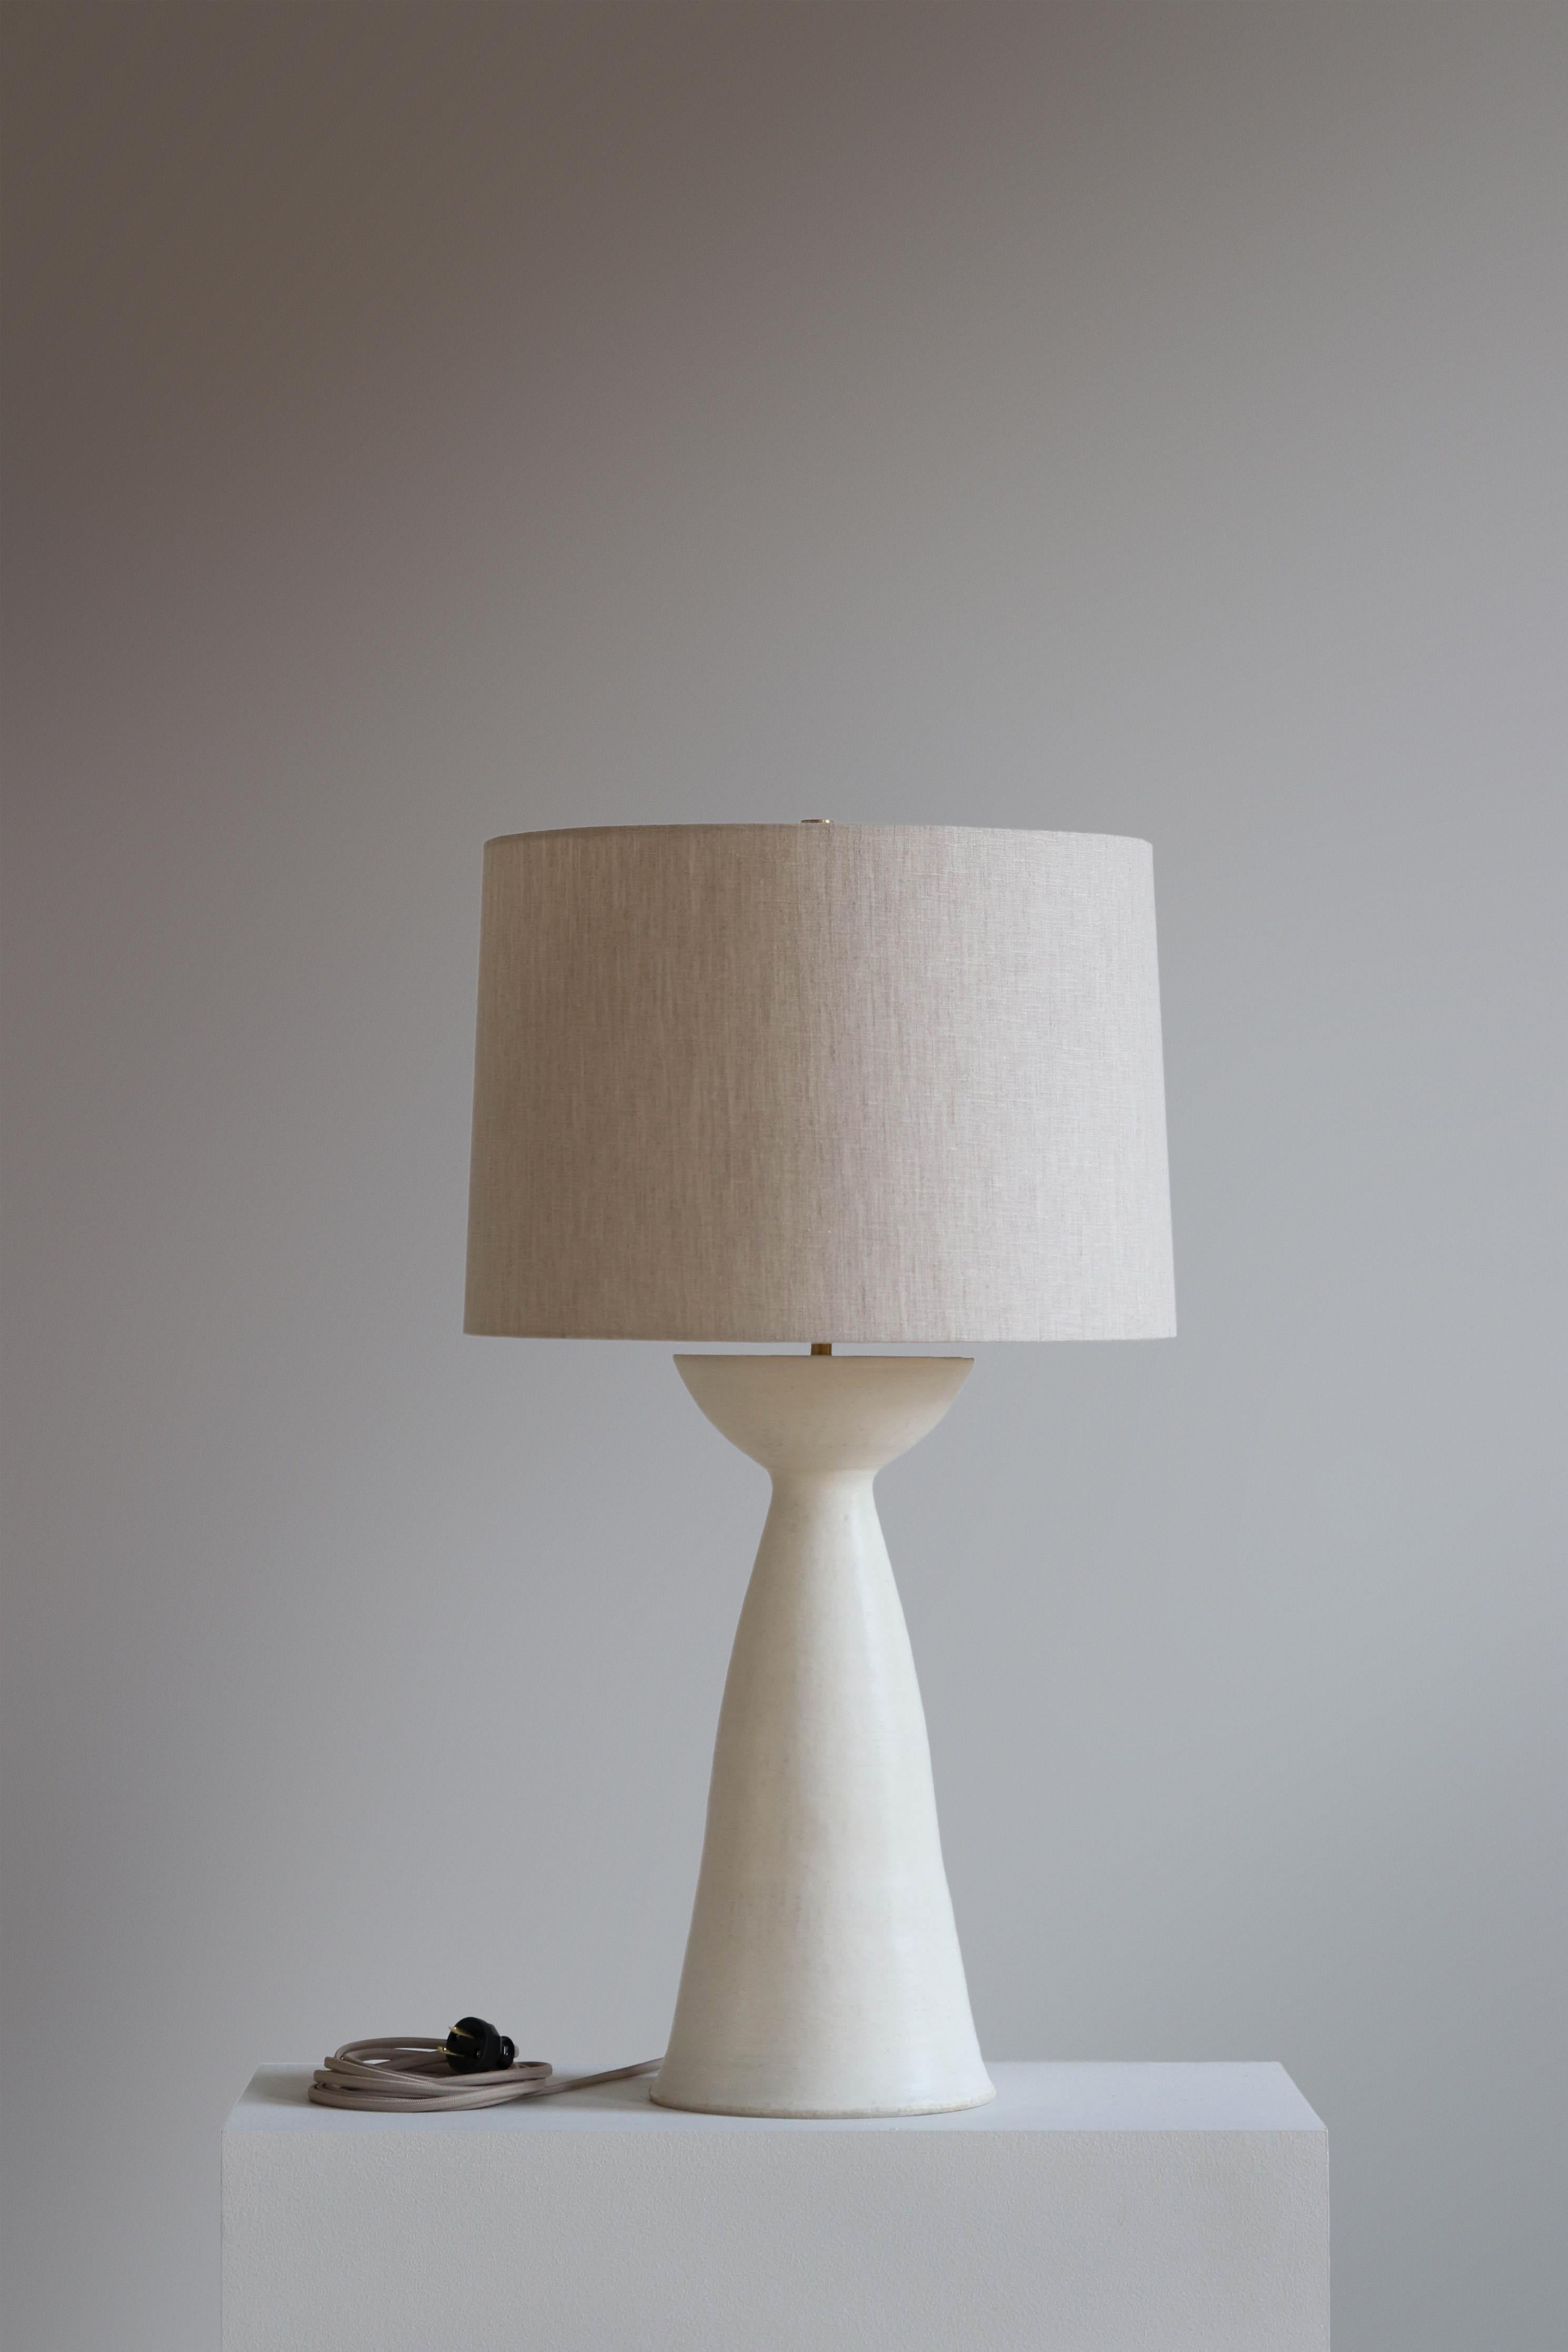 Anthracite Seneca 30 Table Lamp by Danny Kaplan Studio
Dimensions: ⌀ 41 x H 76 cm
Materials: Glazed Ceramic, Unfinished Brass, Linen

This item is handmade, and may exhibit variability within the same piece. We do our best to maintain a consistent